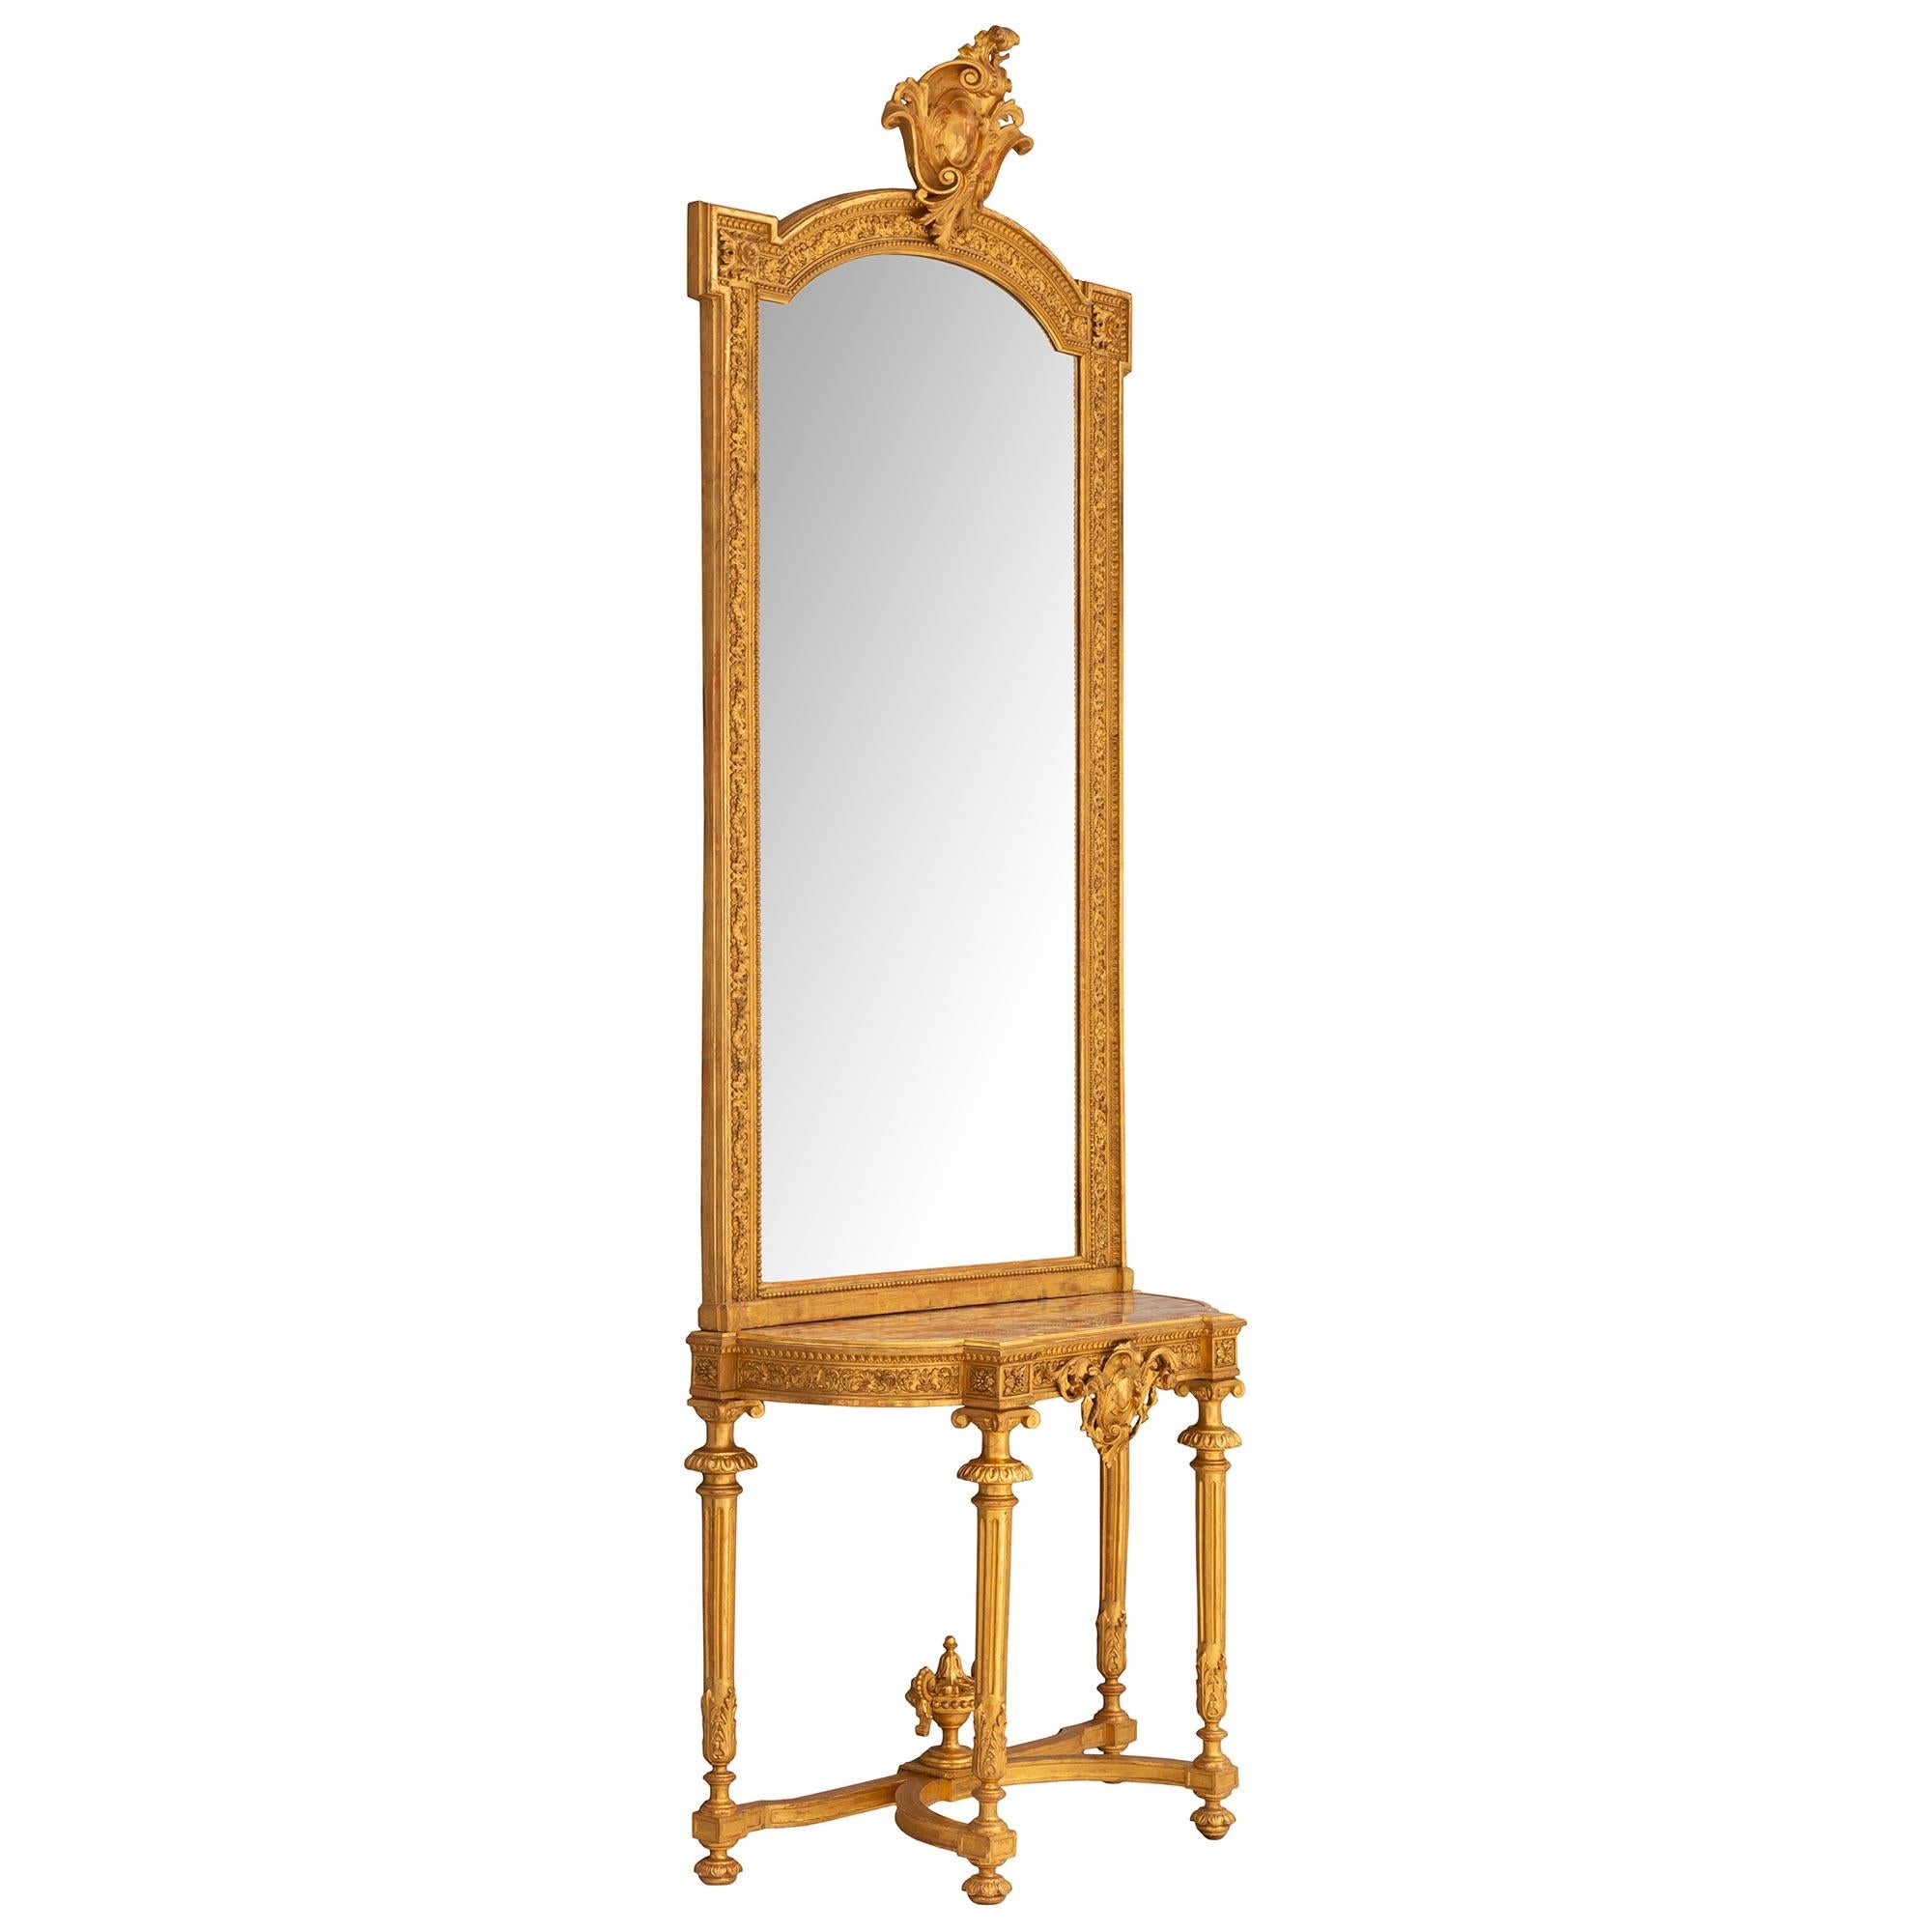 A stunning French Louis XVI st giltwood console with original matching mirror. The console is raised on carved bun feet with reeded legs decorated with acanthus leaves and top capitols. The legs are joined with a stretcher with a wonderful carved